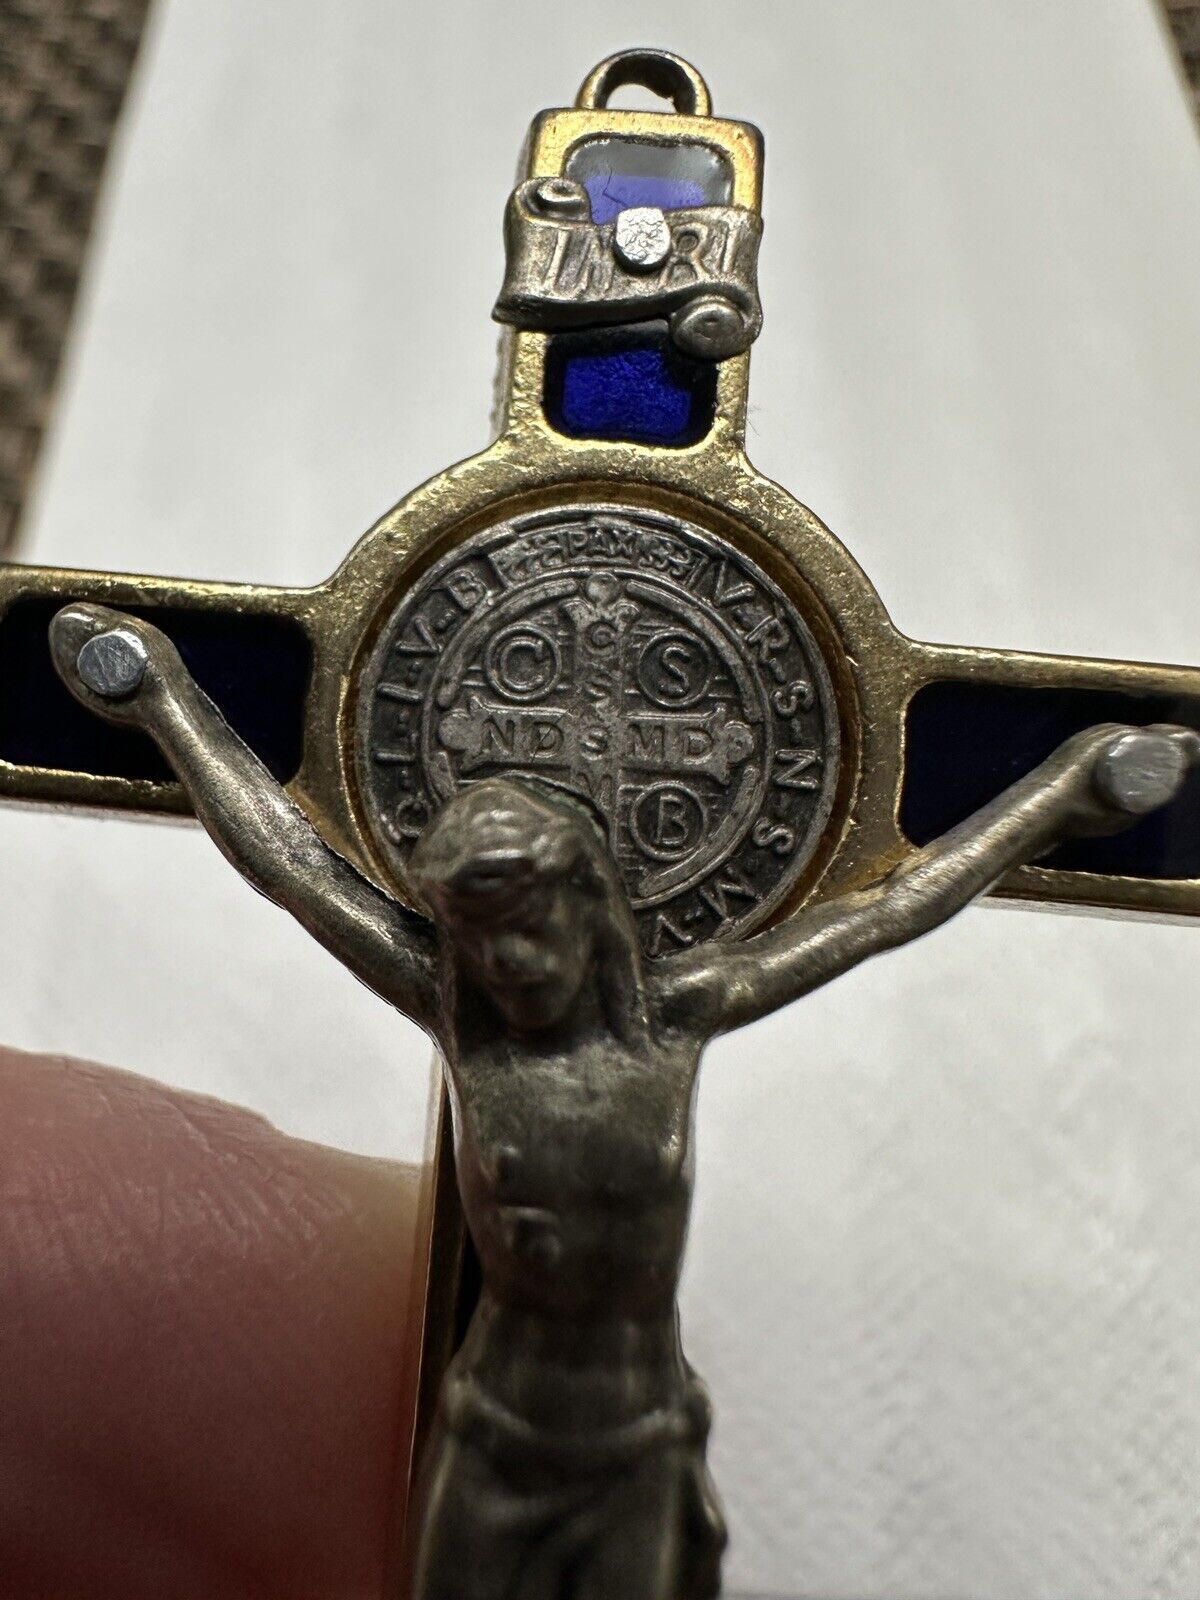 Vintage Italian Crucifix Gold Tone With Deep Blue Inlay 2.25 Inches